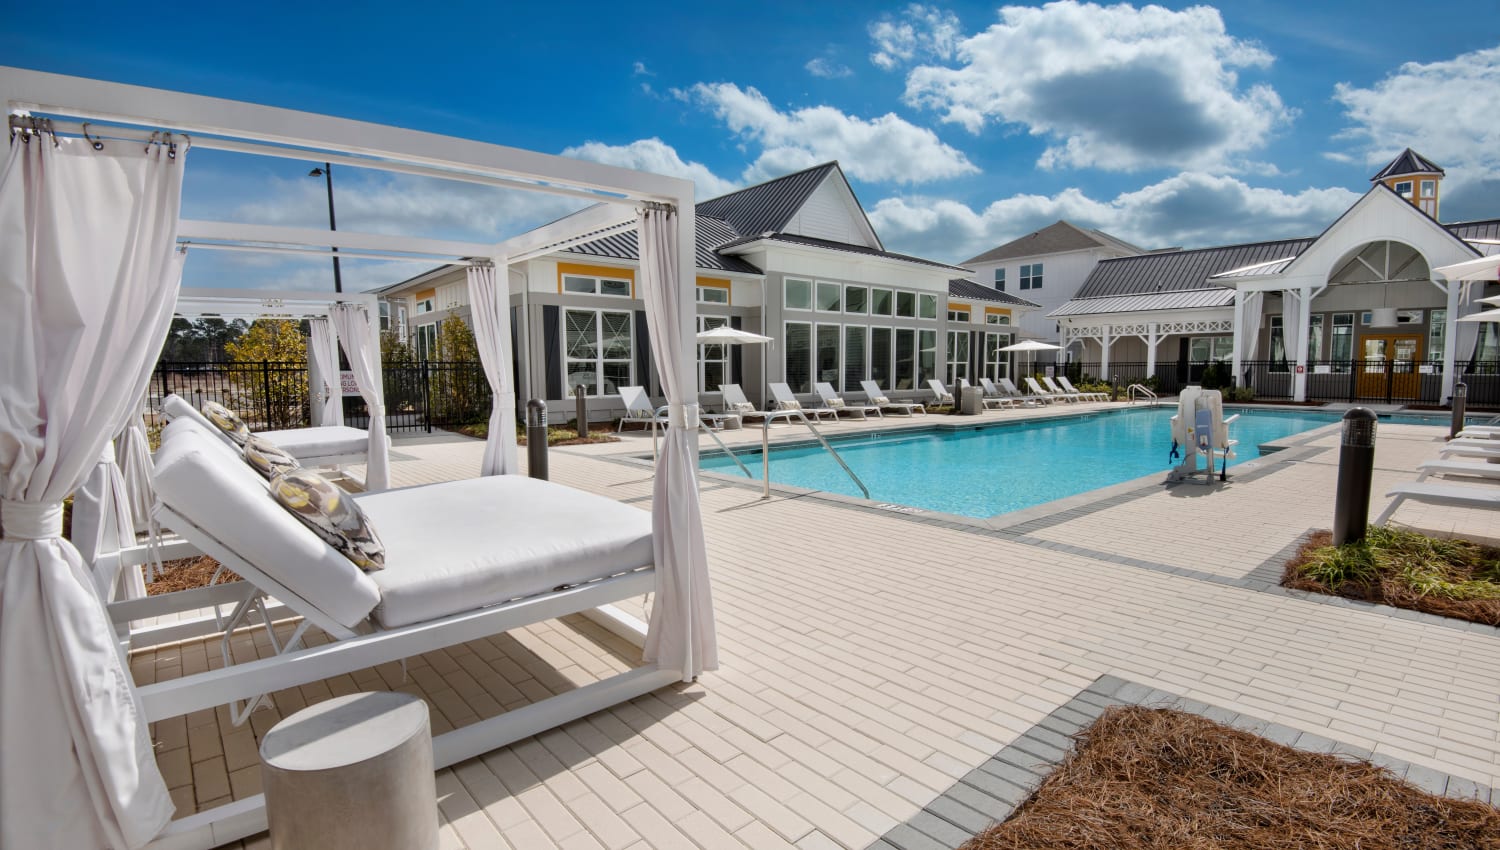 Poolside cabanas and lounge chairs at Capital Crest at Godley Station in Savannah, Georgia